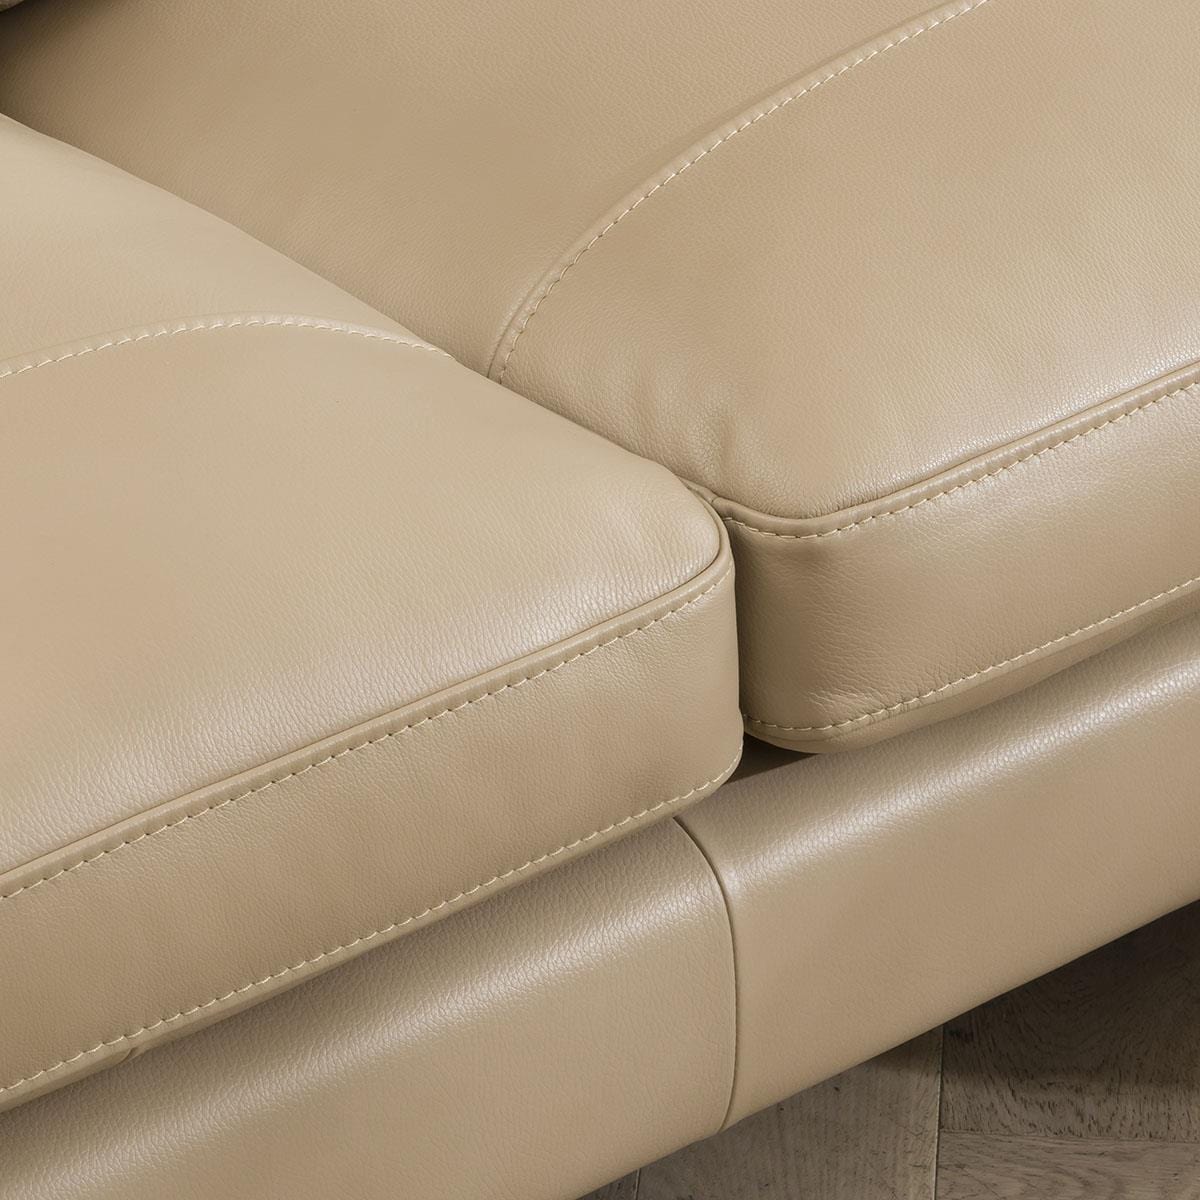 Quatropi Ultra-Modern Luxury Leather Armchair - Real Leather Options - 95cm